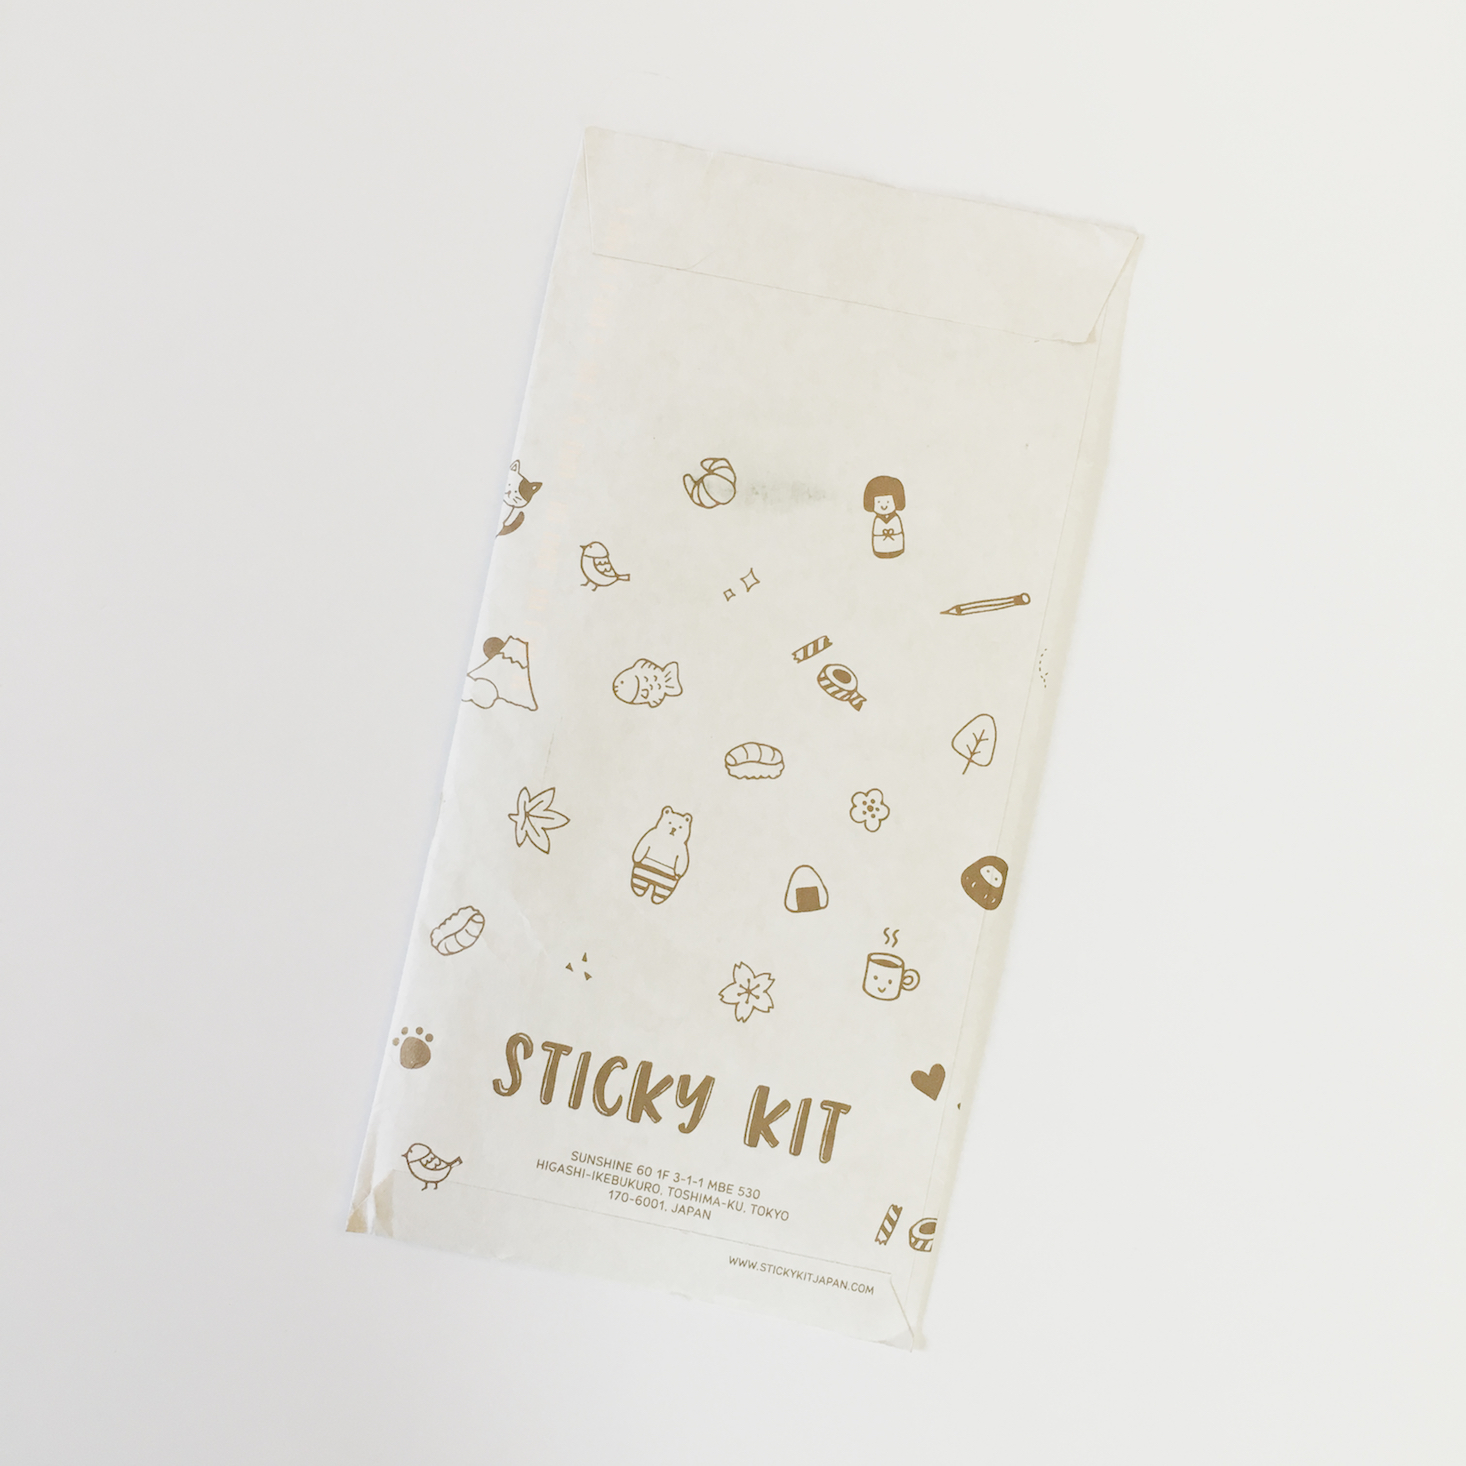 Sticky Kit Sticker Subscription Review + Coupon – November 2017